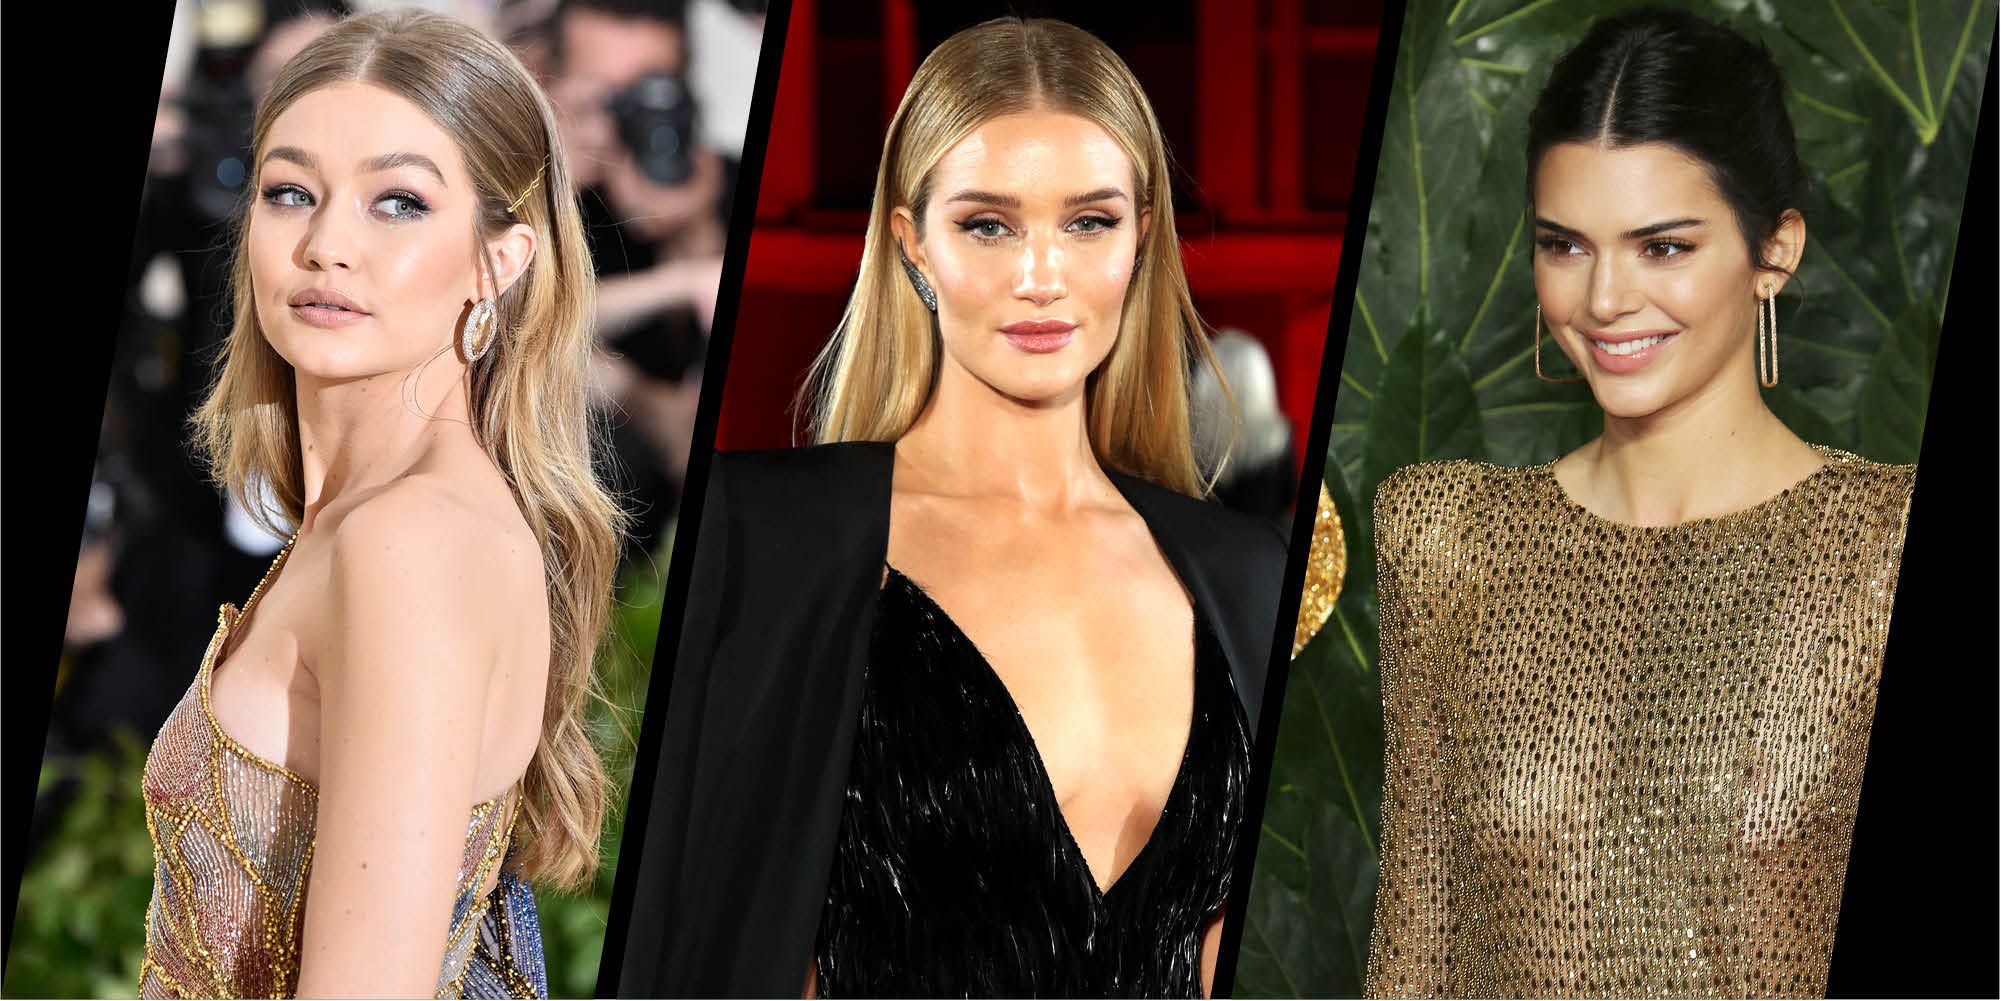 The World'S Highest-Paid Supermodels In 2018 – Forbes' Best Paid Supermodels